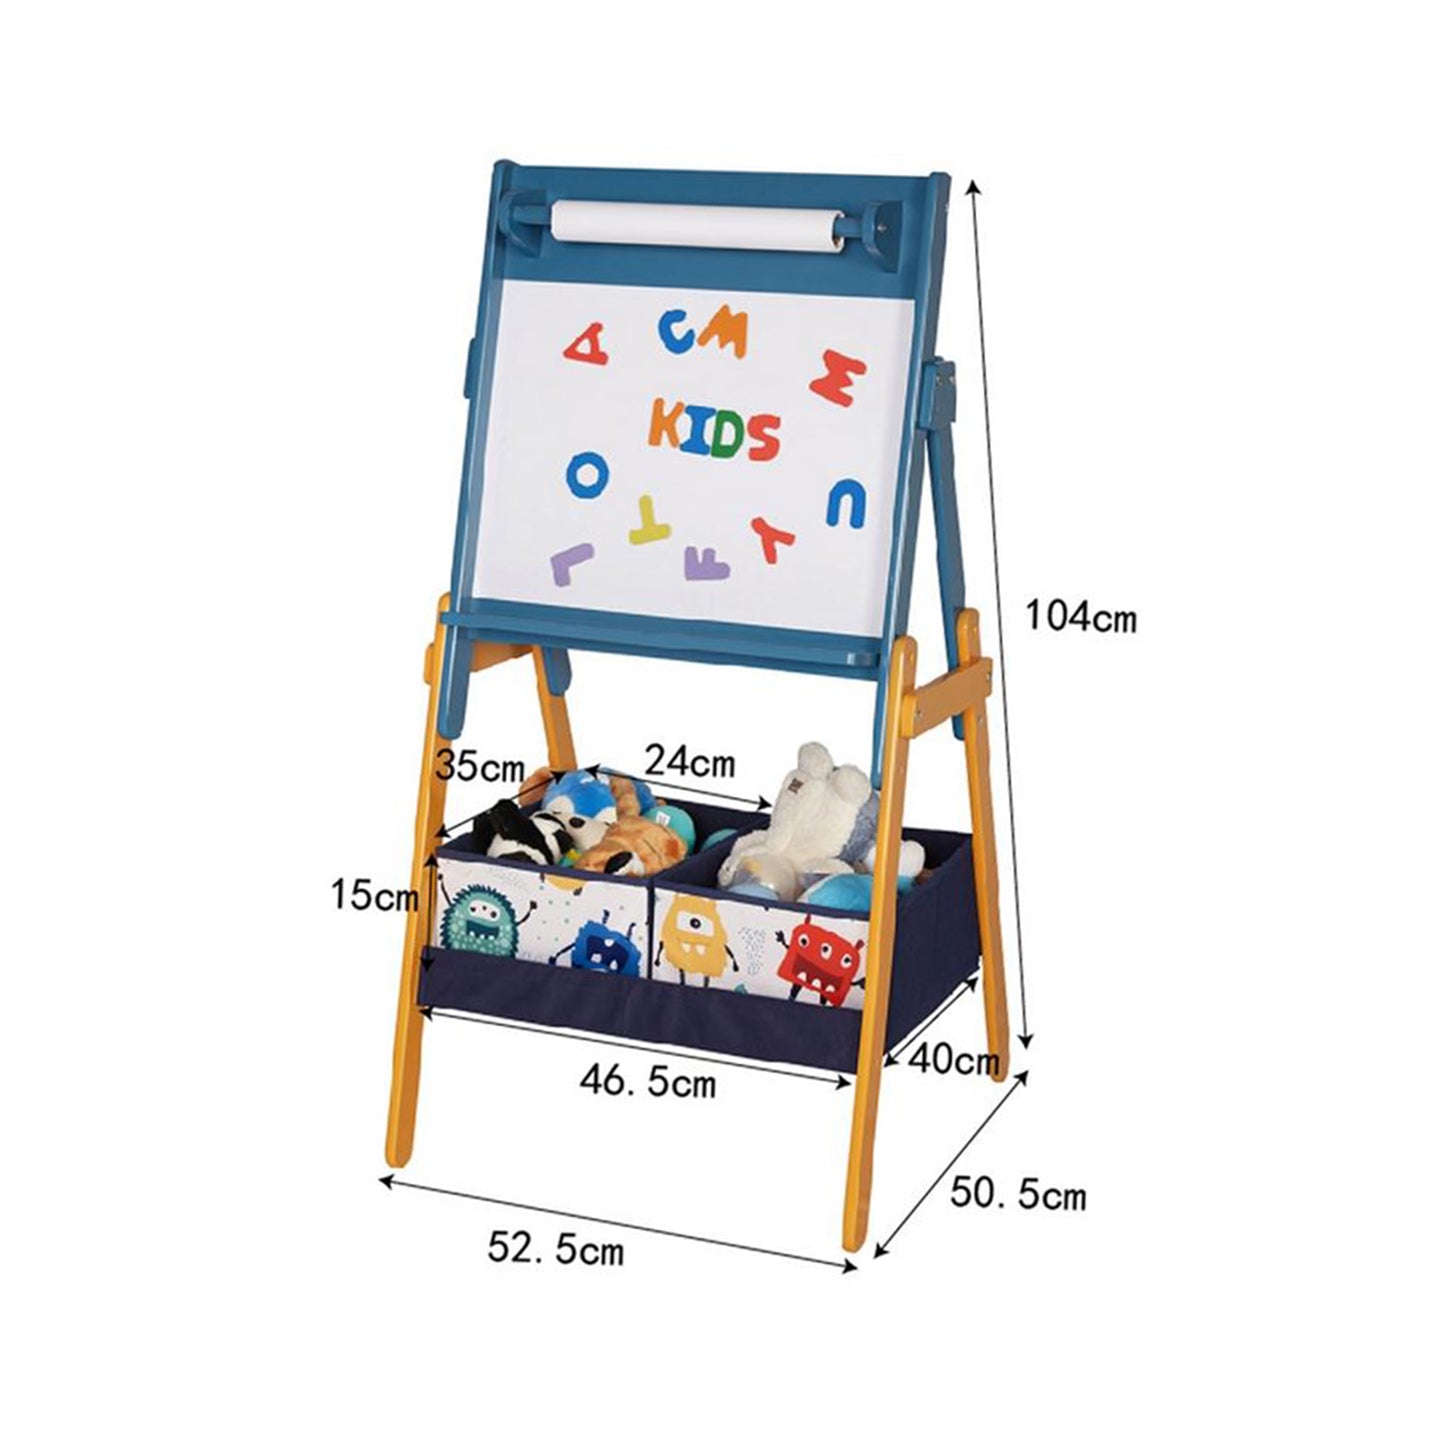 Children's wooden writing and drawing board, double-sided, with magnets - GHOSTS